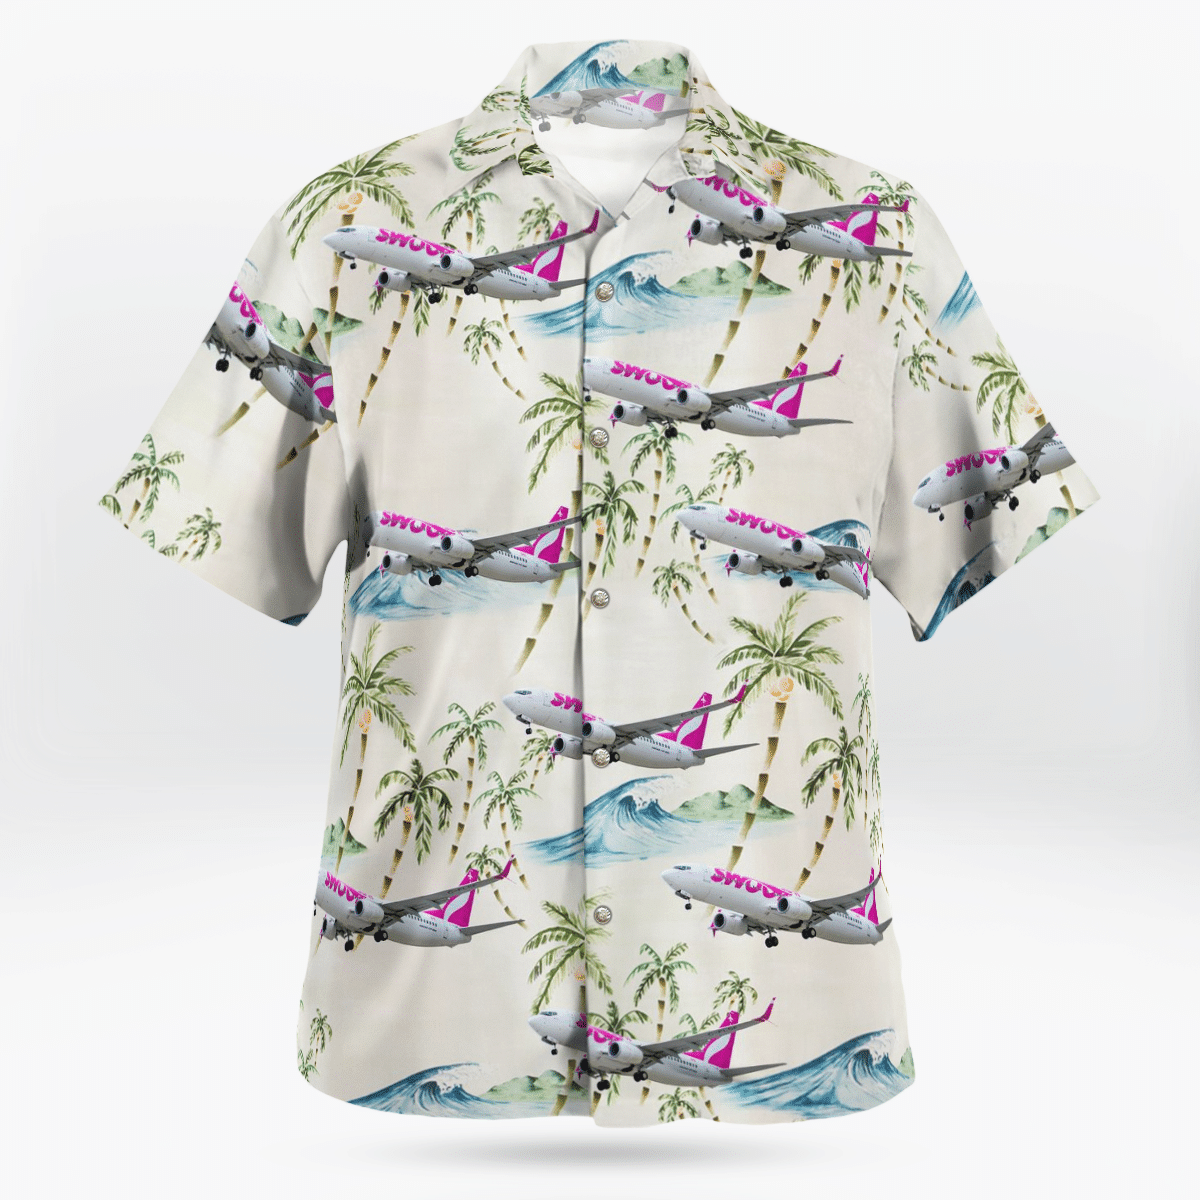 BEST Swoop airline Boeing 737 MAX 8 3D Aloha Shirt2